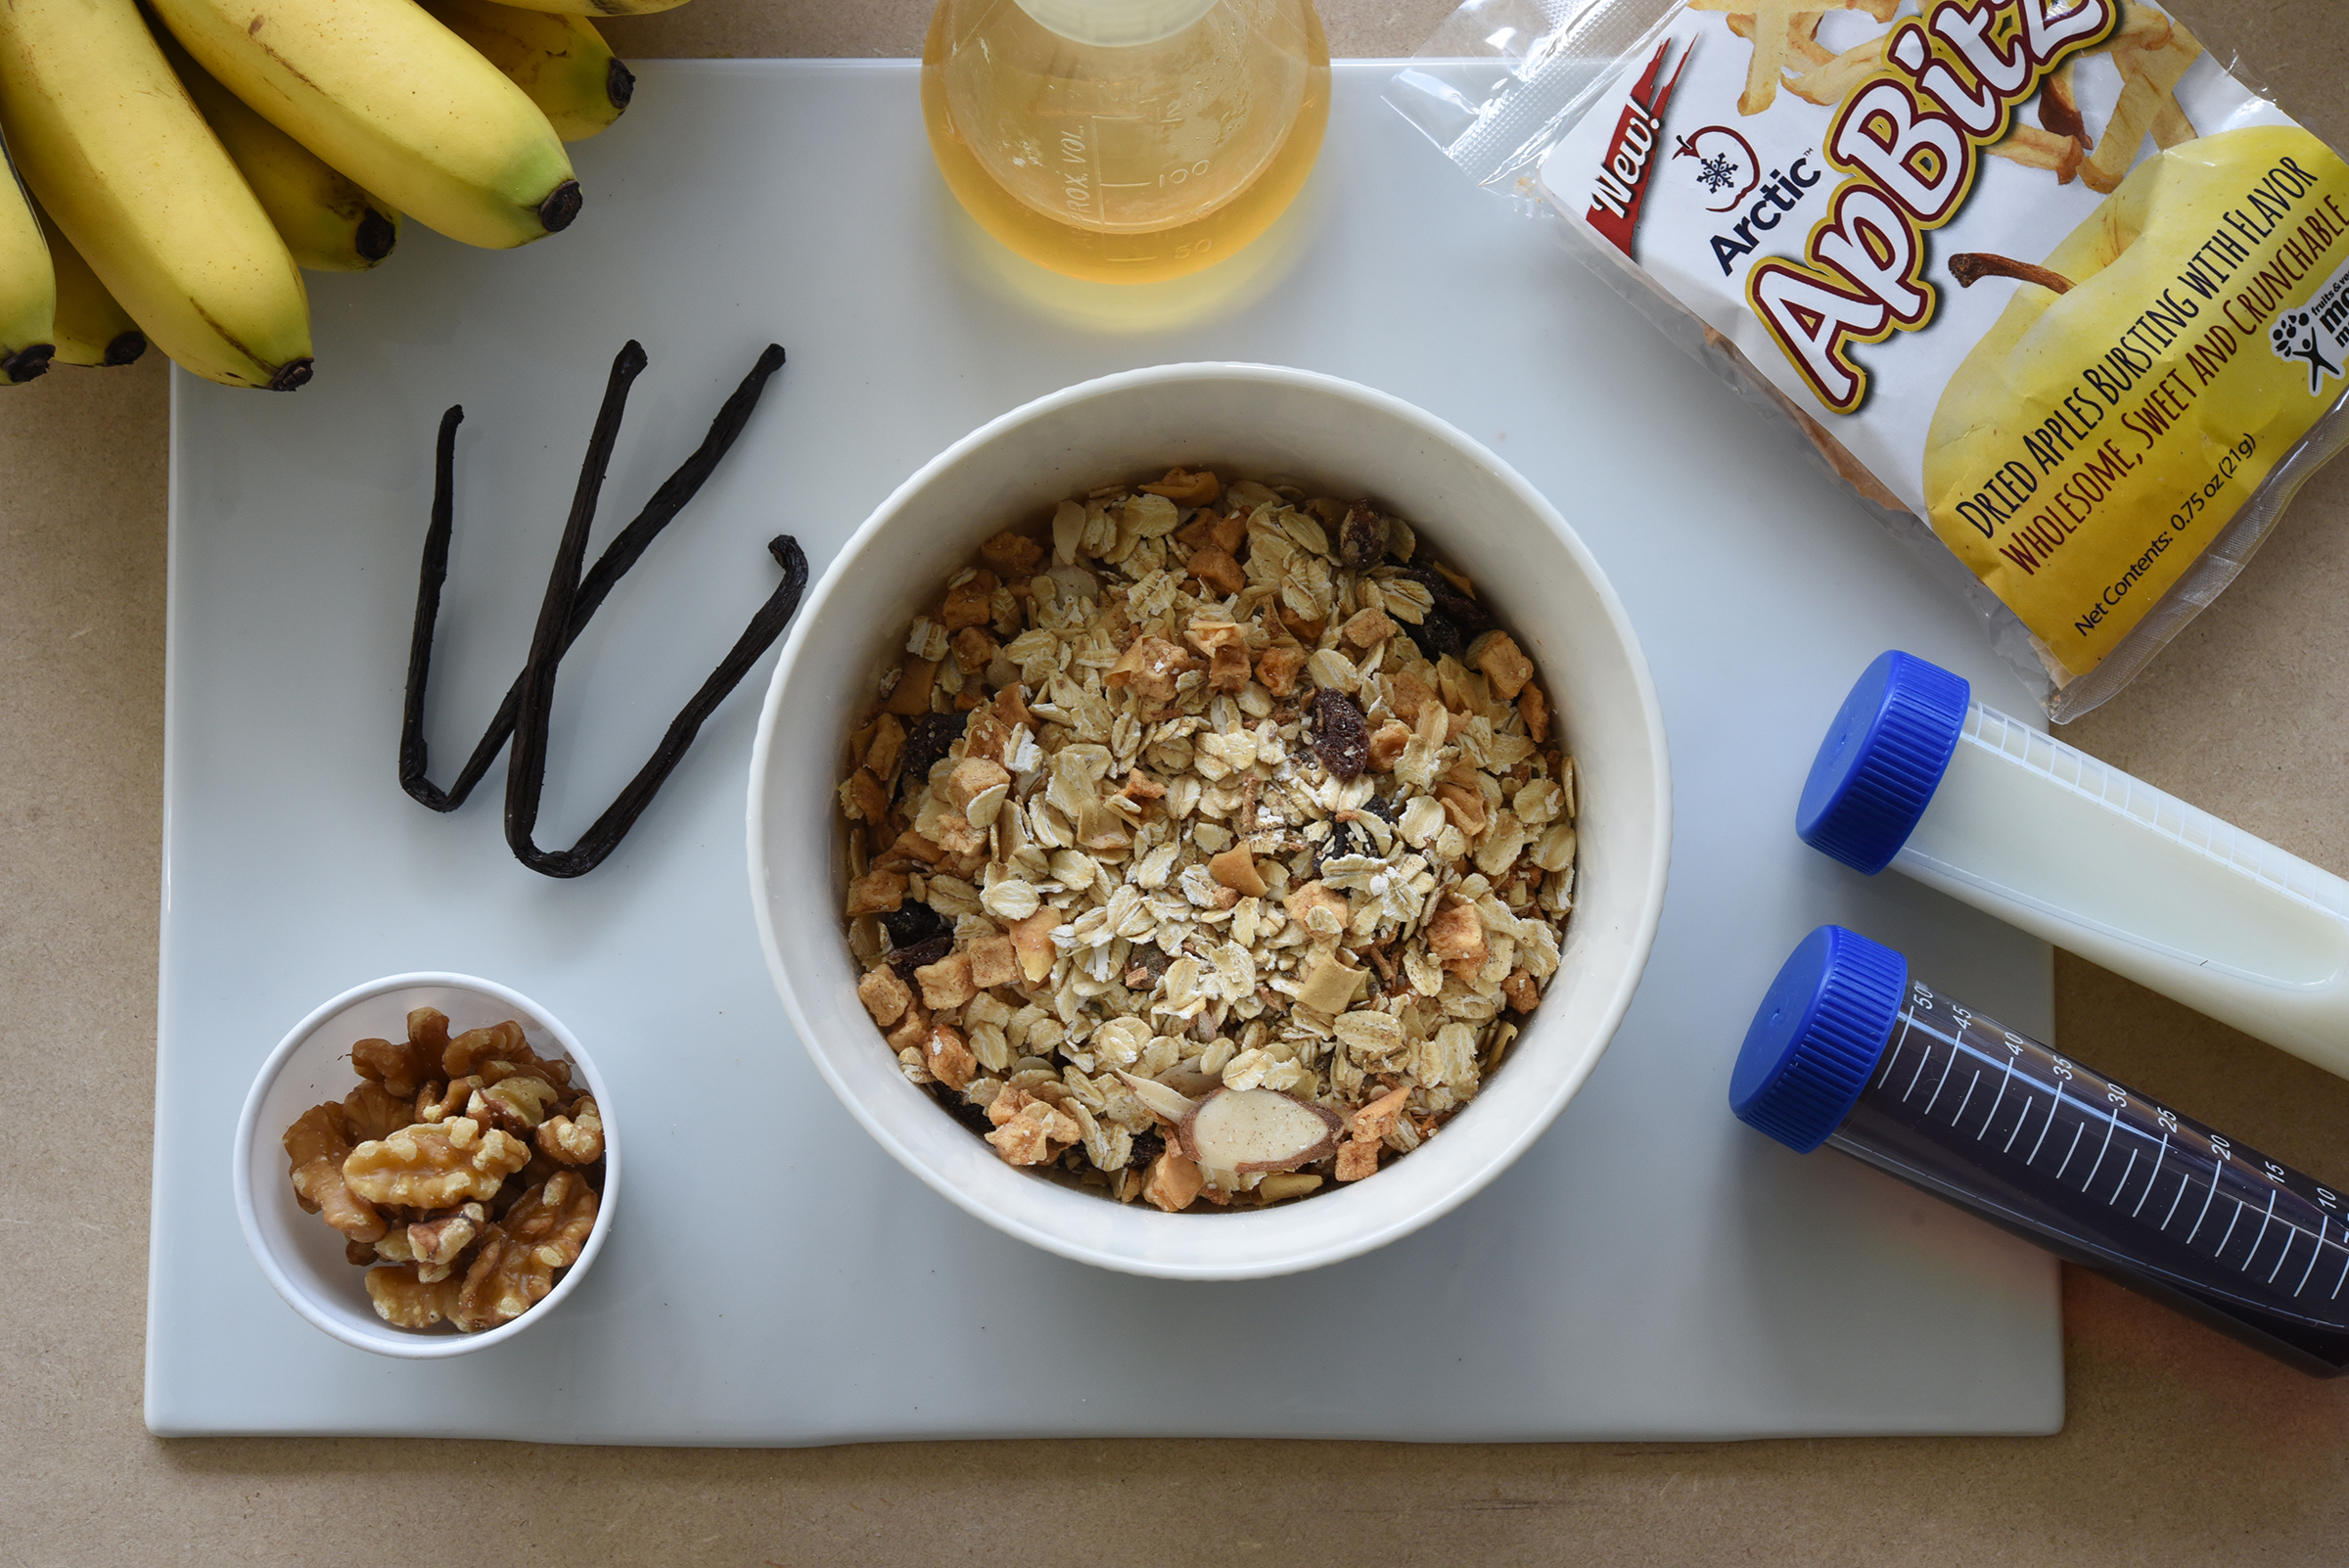 Oats surrounded by bananas, apple bites, pecans, and milk